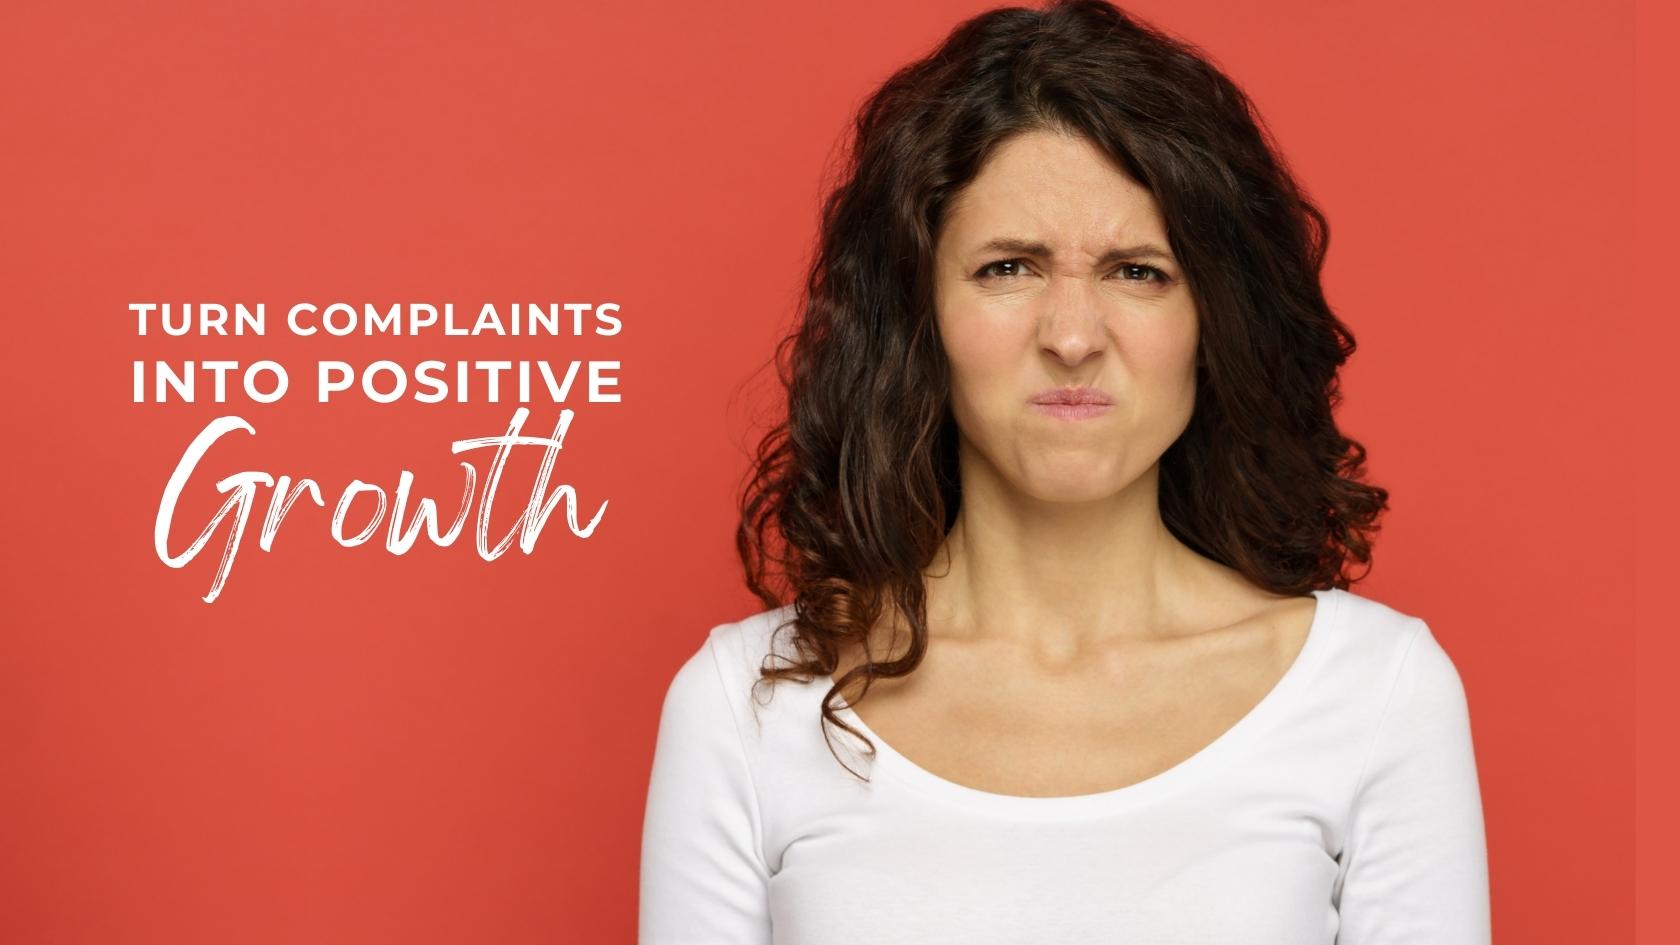 Turn Customer Complaints Into Positive Growth